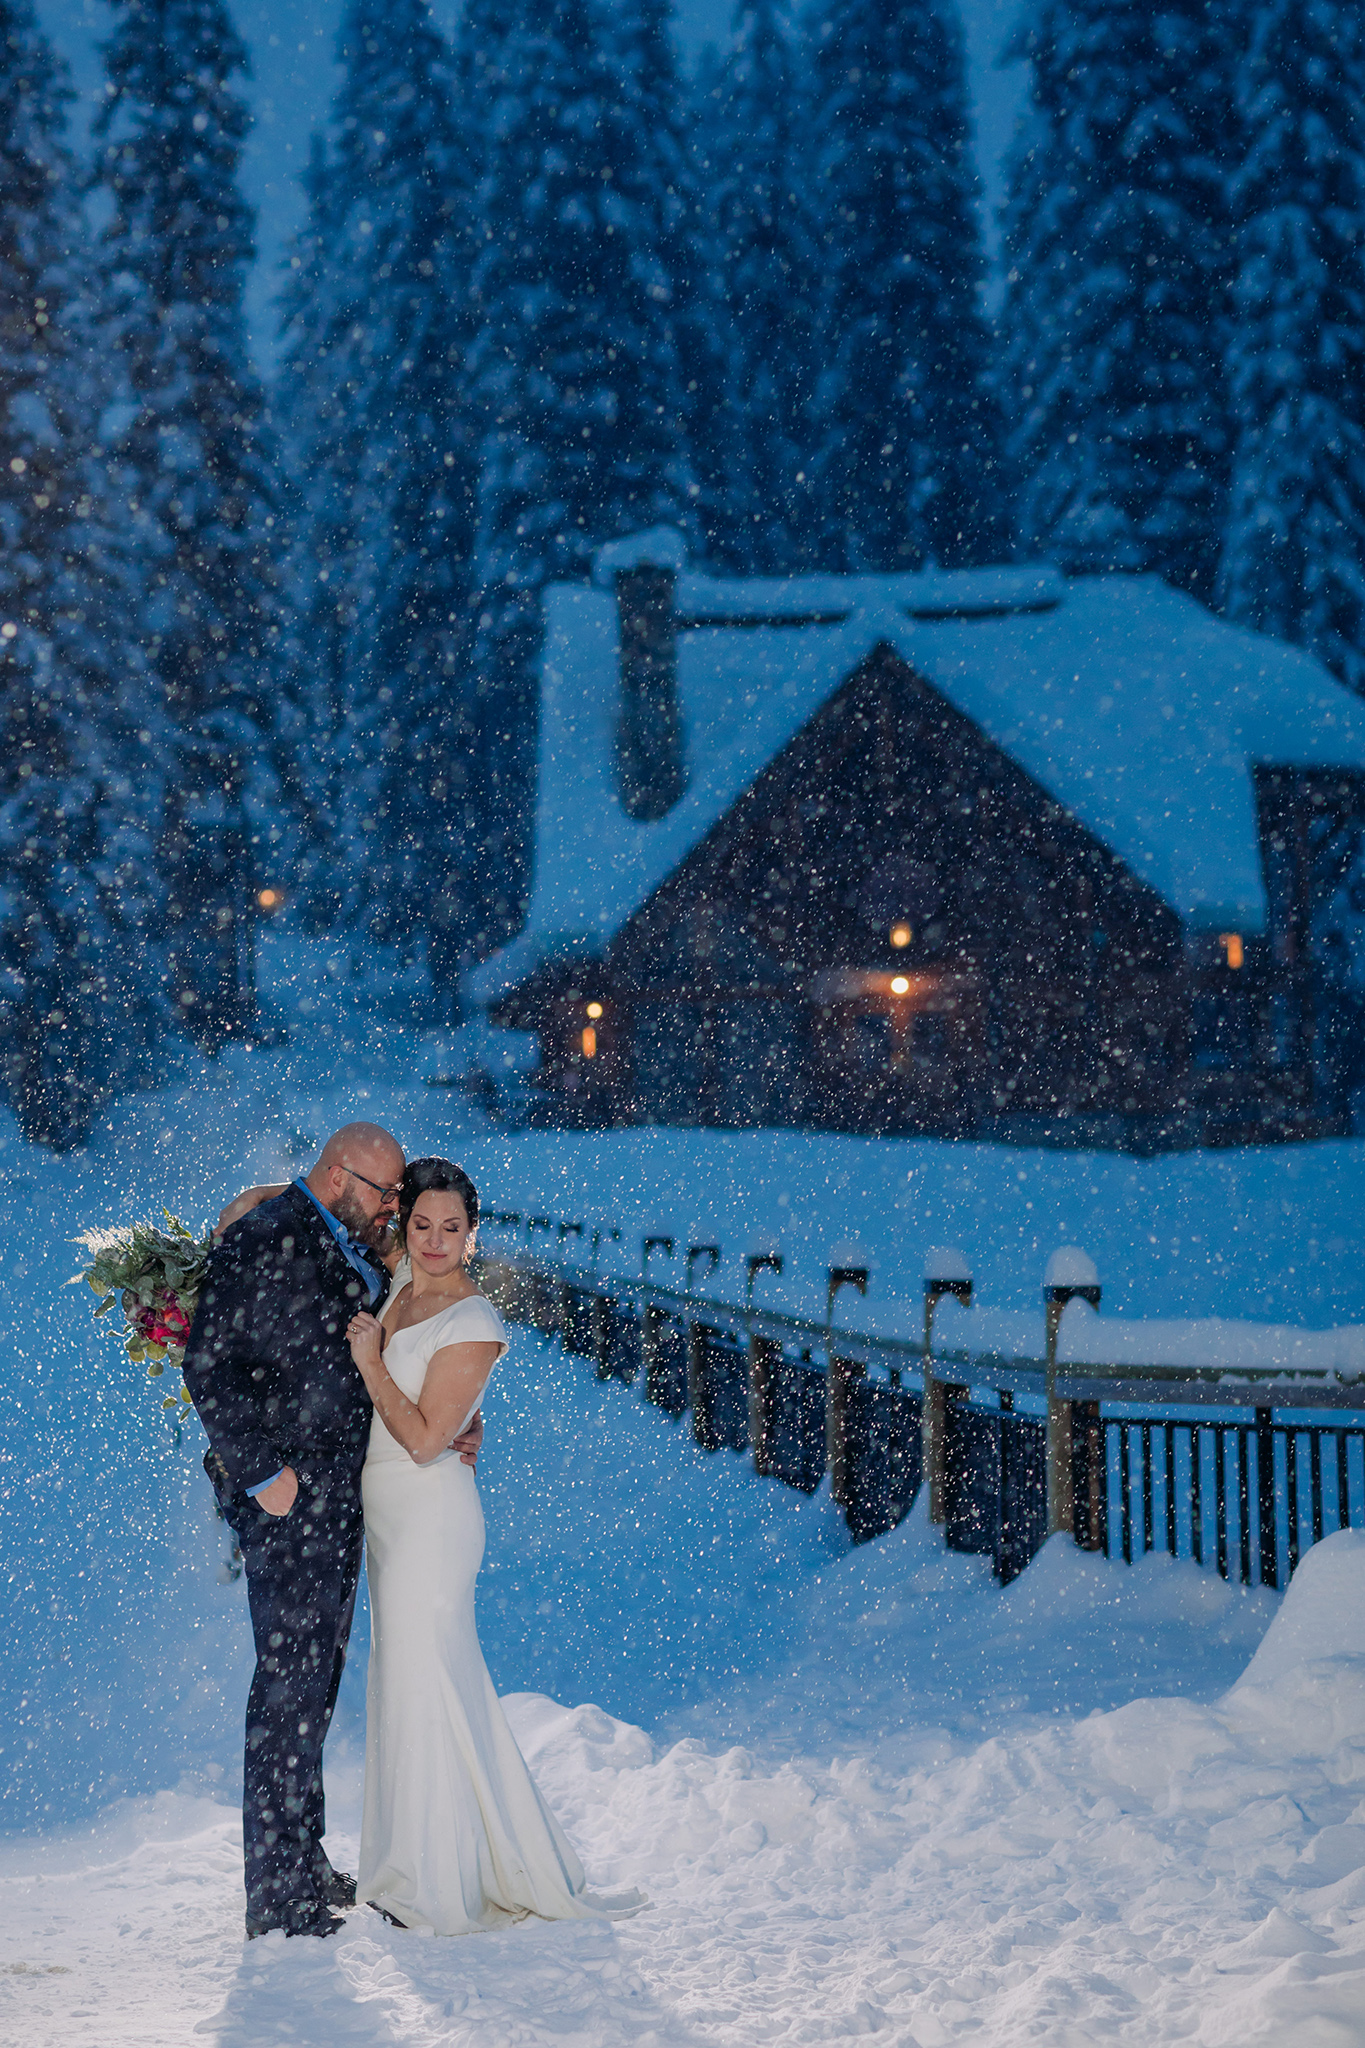 Emerald Lake Lodge winter elopement outdoor bride & groom portraits with backlit falling snow during twilight blue hour photographed by mountain elopement & wedding photographer ENV Photography